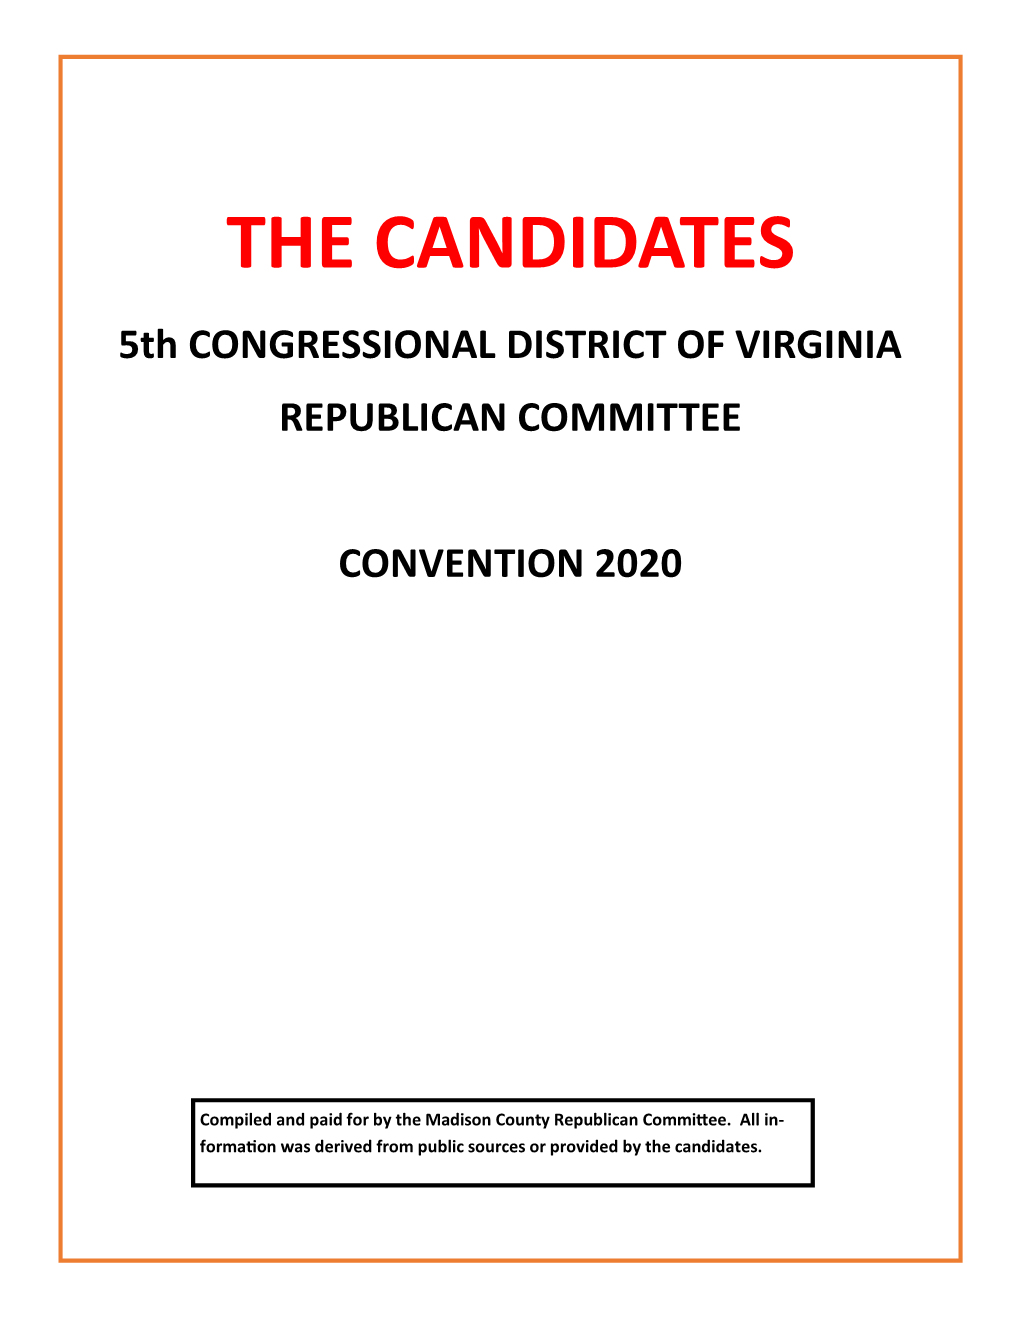 THE CANDIDATES 5Th CONGRESSIONAL DISTRICT of VIRGINIA REPUBLICAN COMMITTEE